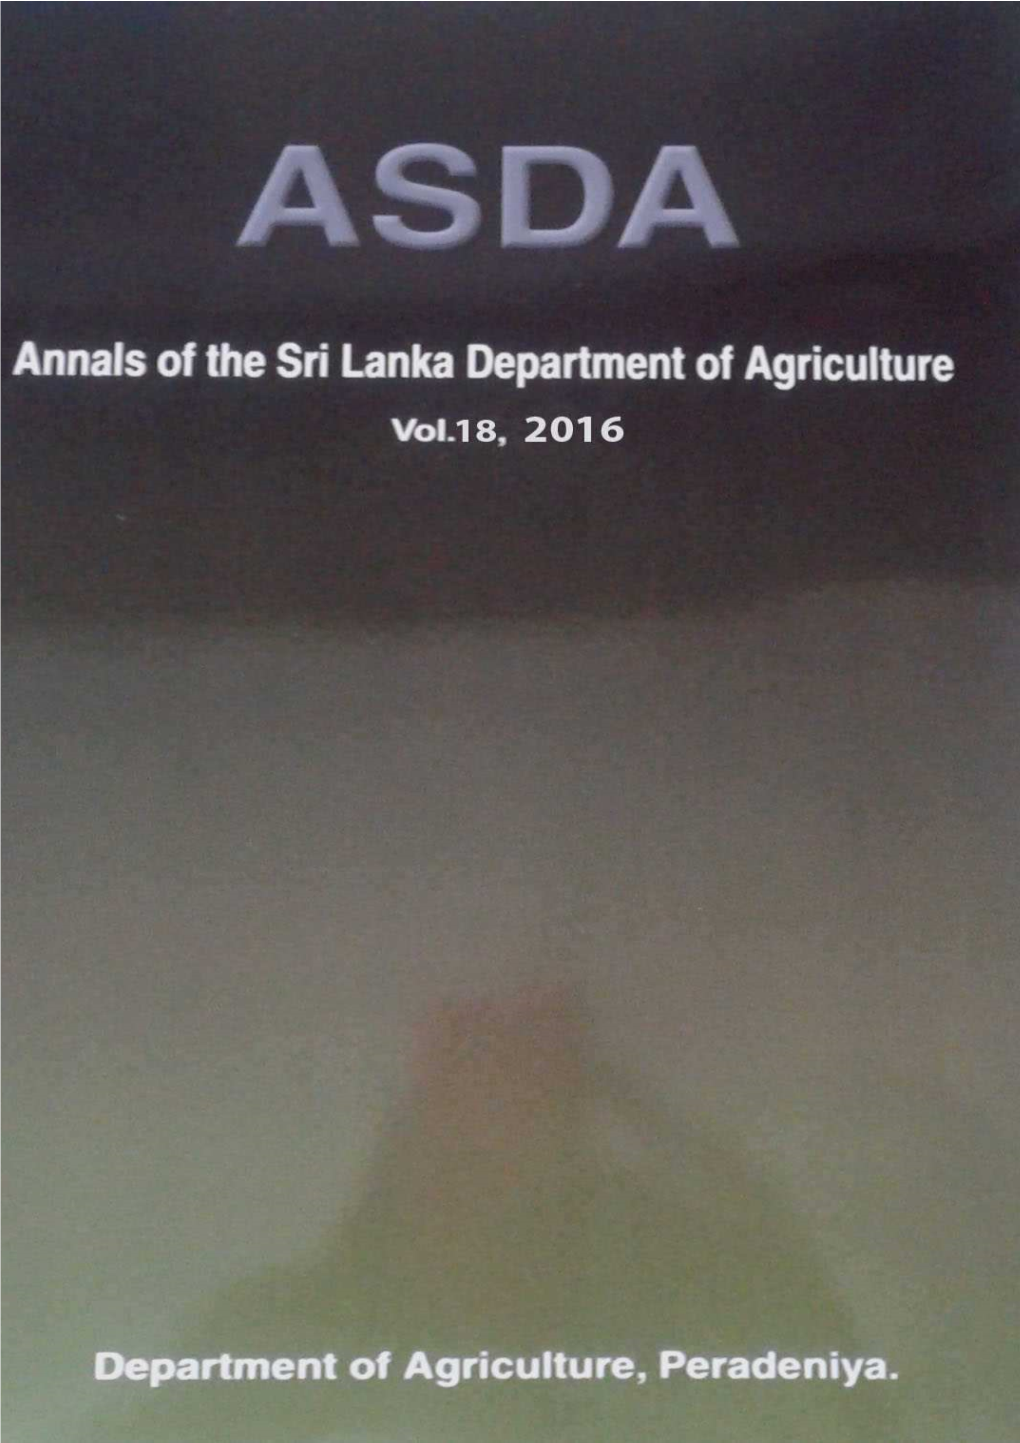 Annals of the Sri Lanka Department of Agriculture ASDA 2016